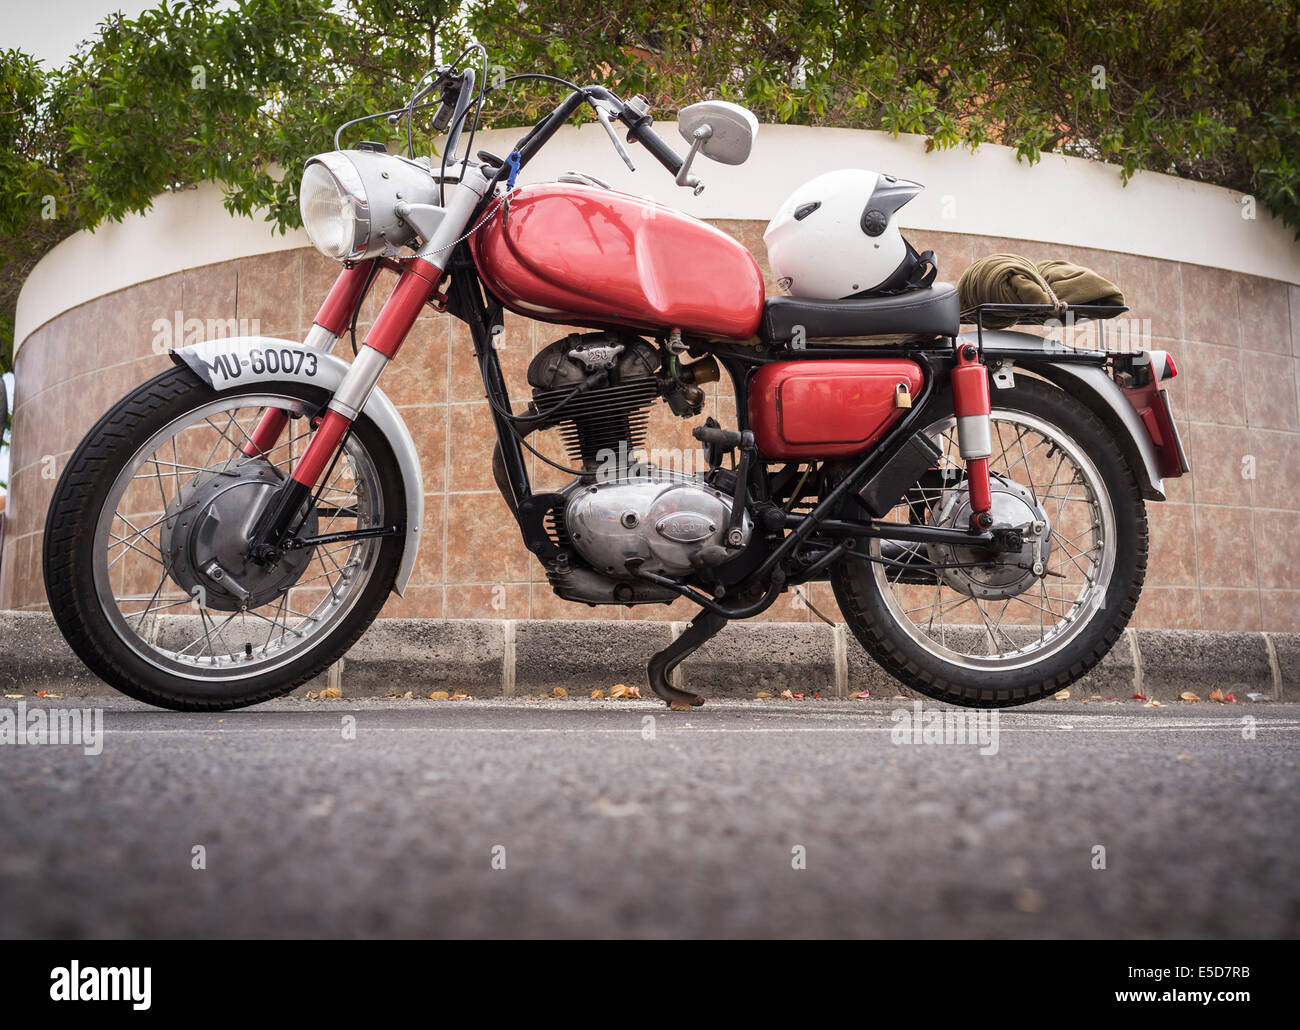 Ducati 250 single from 1964 spotted in Playa San Juan, Tenerife, Canary Islands, Spain. Stock Photo